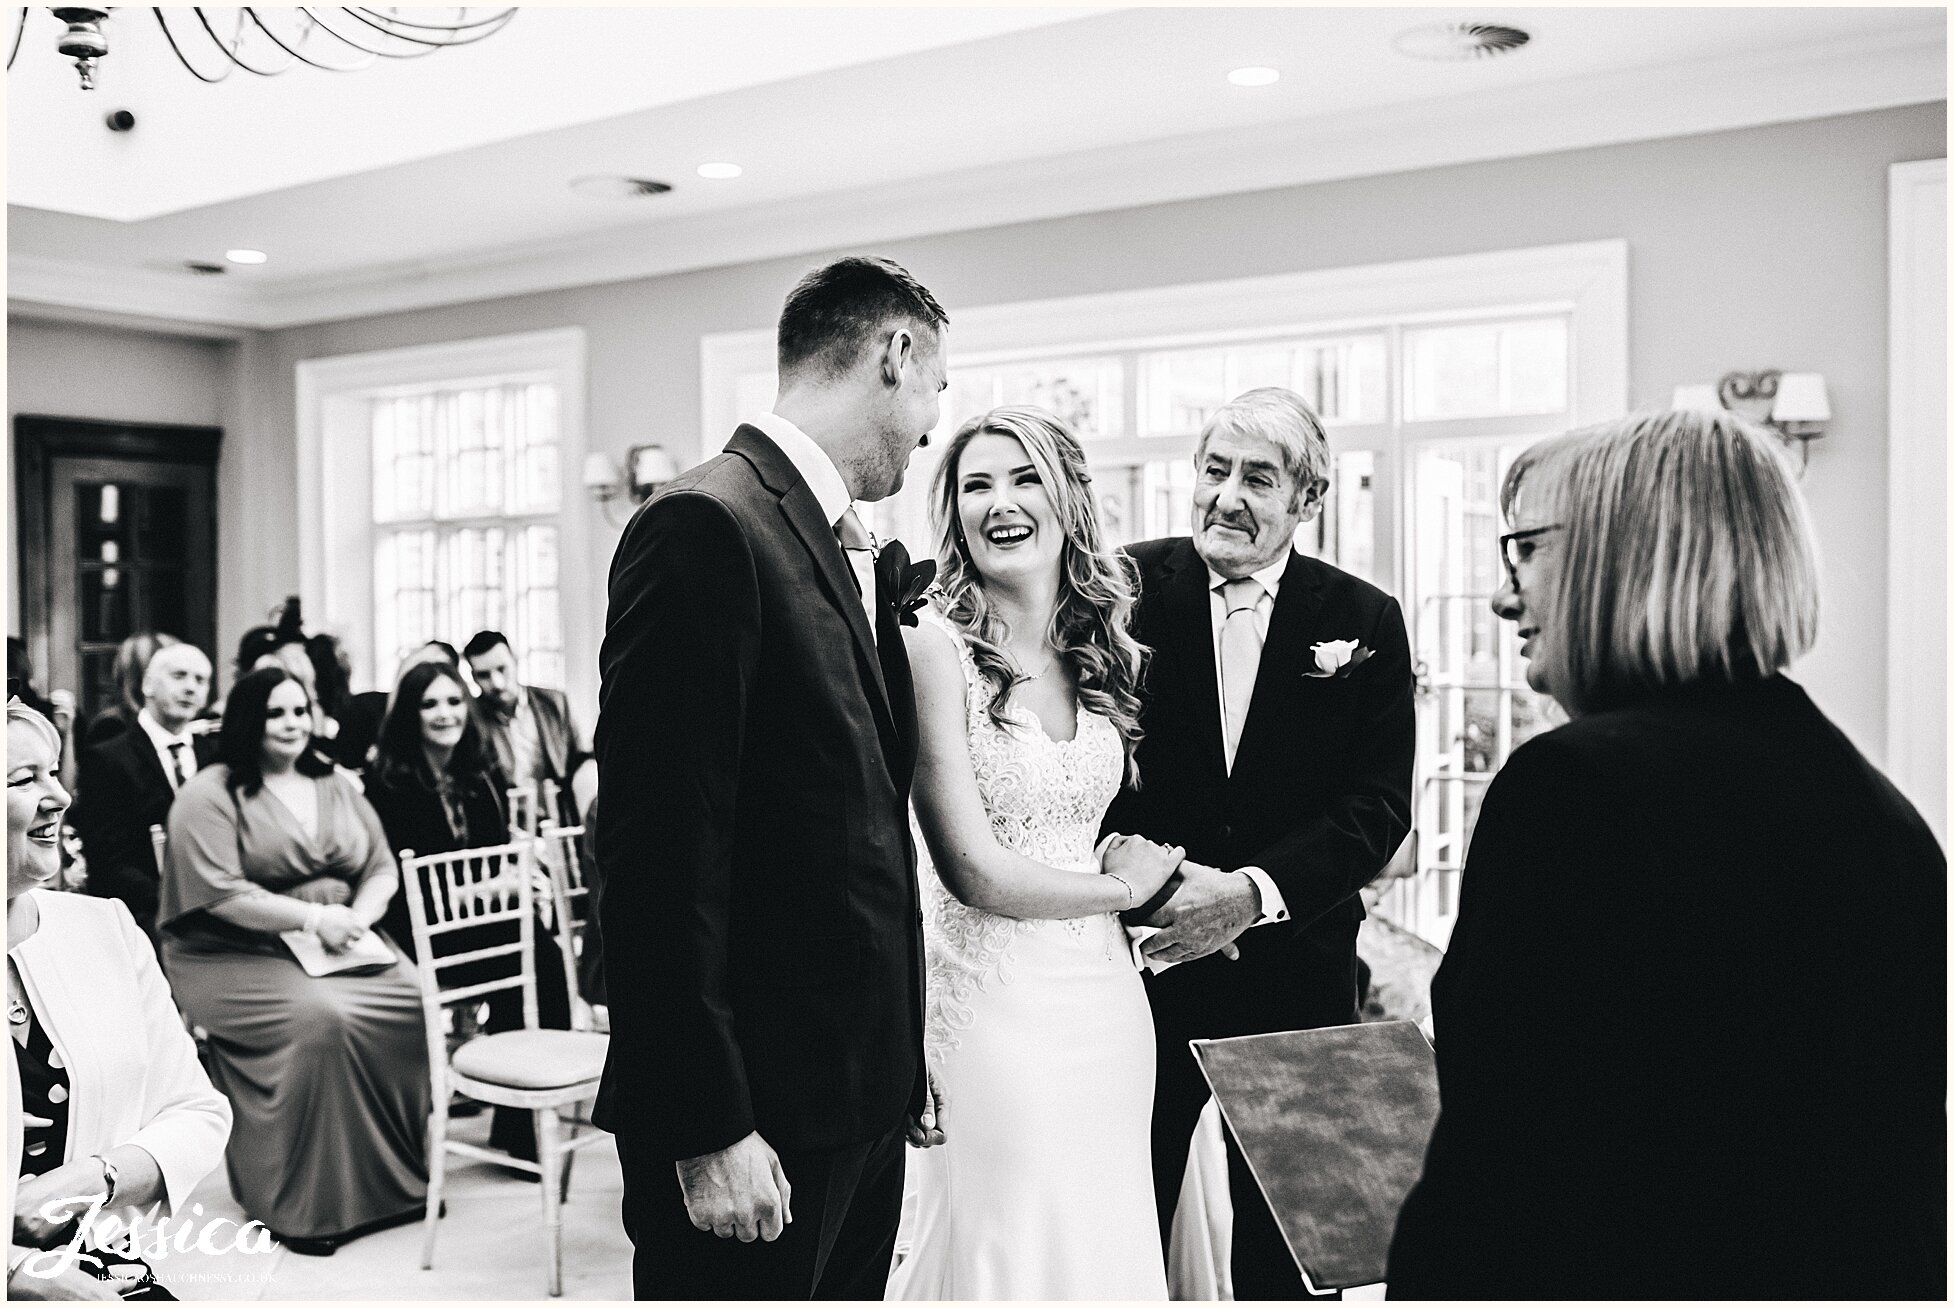 the bride laughs with her groom as they meet at the aisle